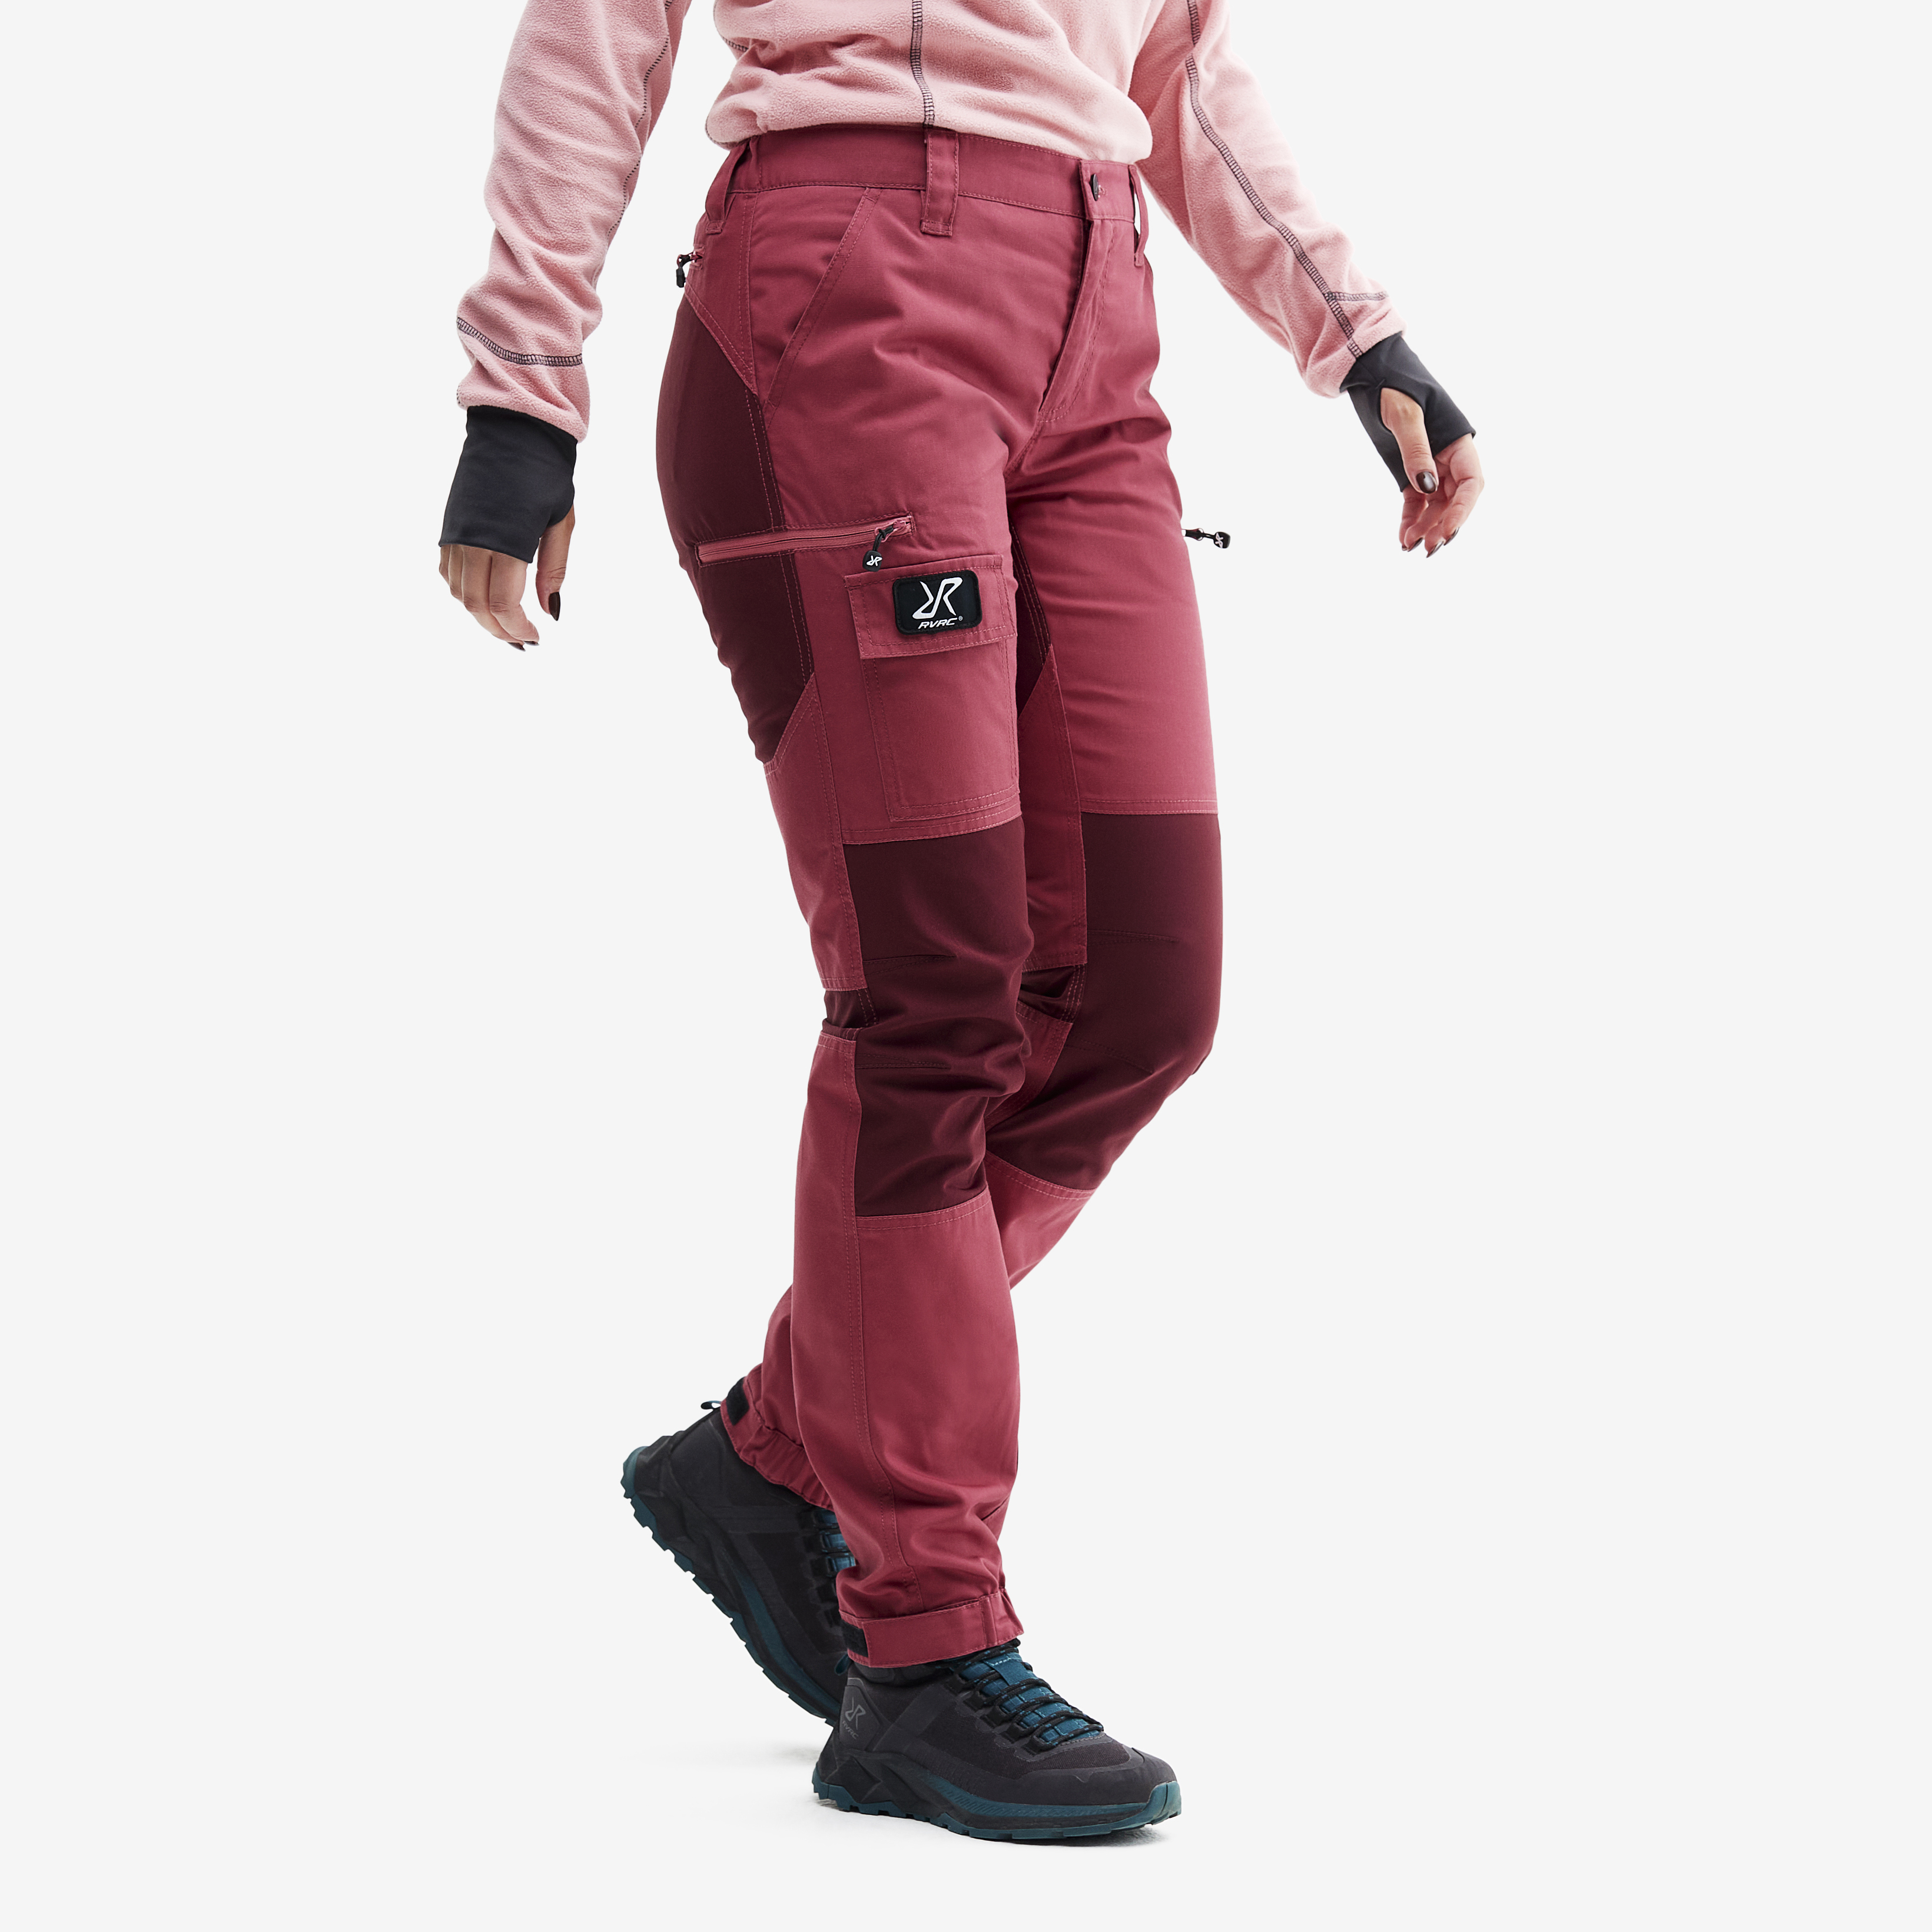 Nordwand outdoor pants for women in pink